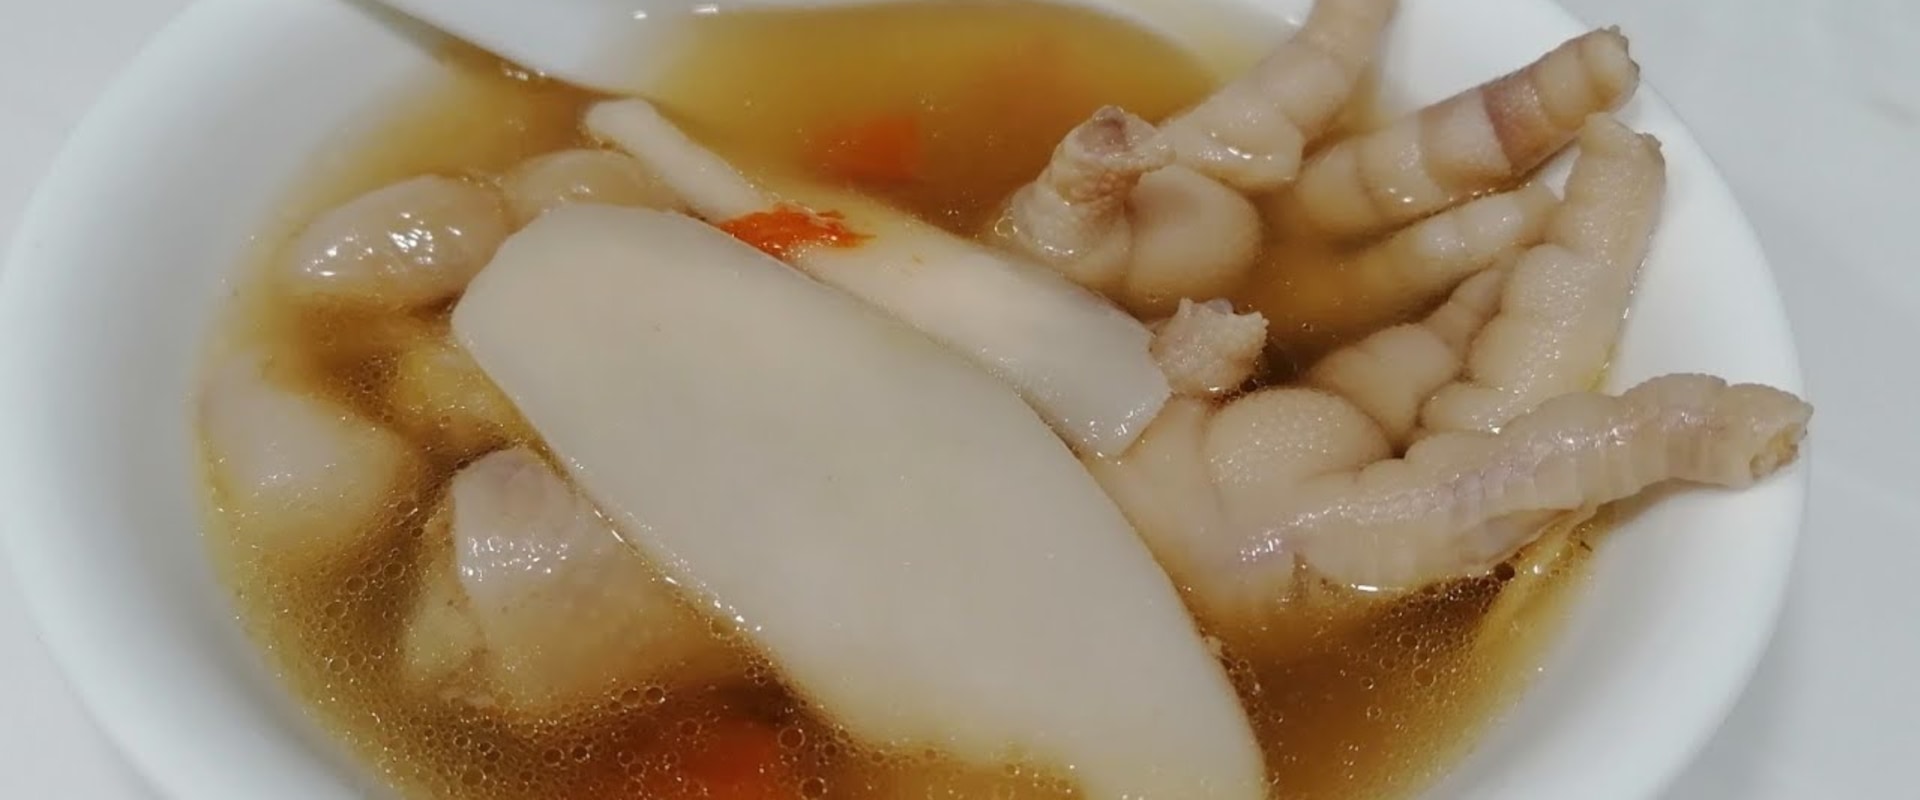 Dried Scallop and Chinese Yam Soup for Boosting Immunity: A Delicious and Nutritious Recipe